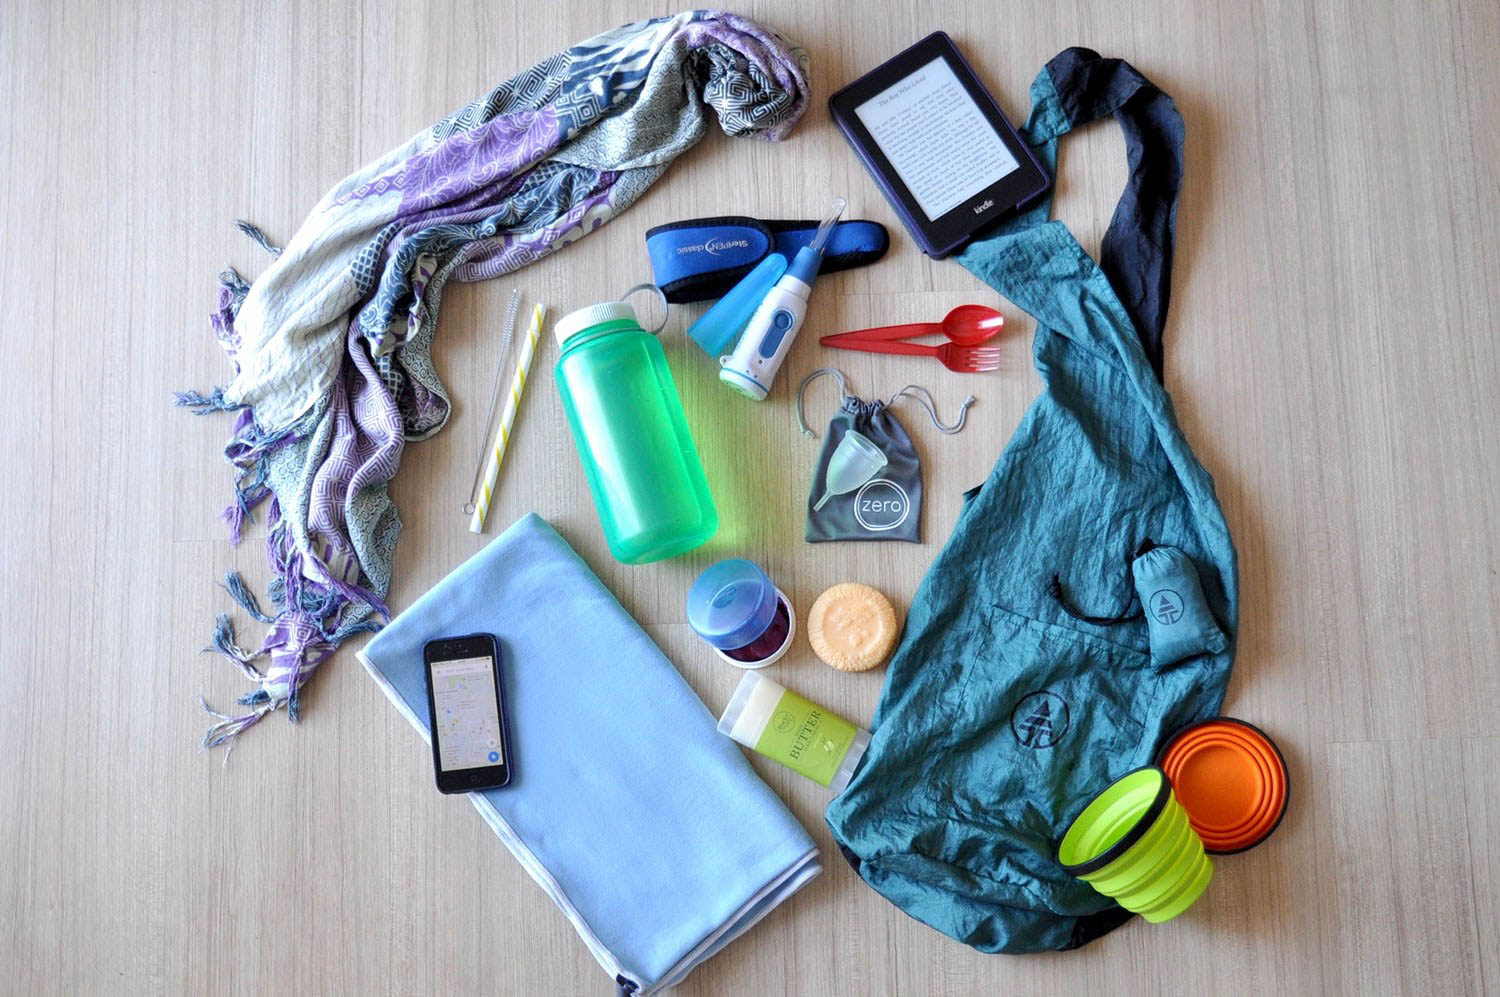 Eco friendly travel gear packing list